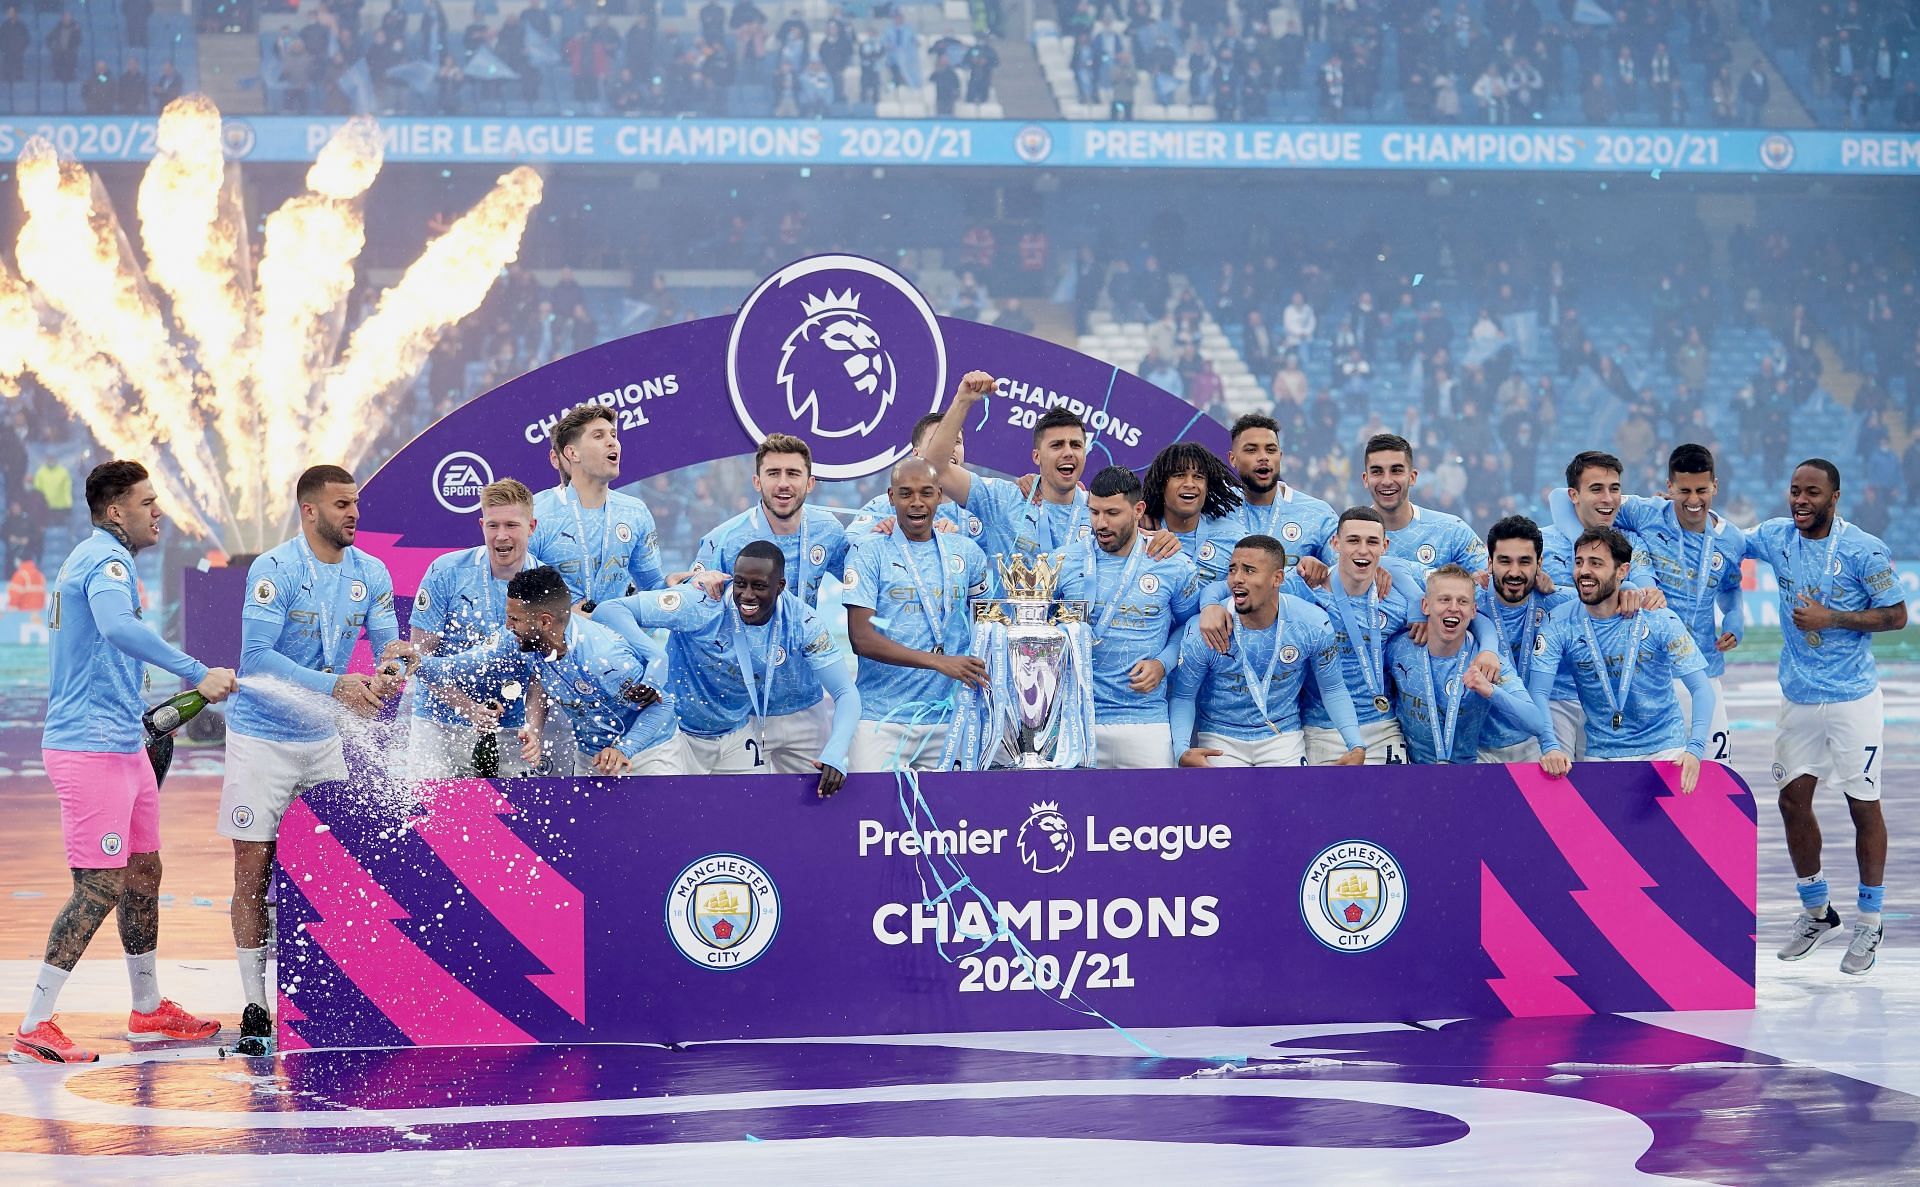 The Cityzens are currently one of the best teams in English football